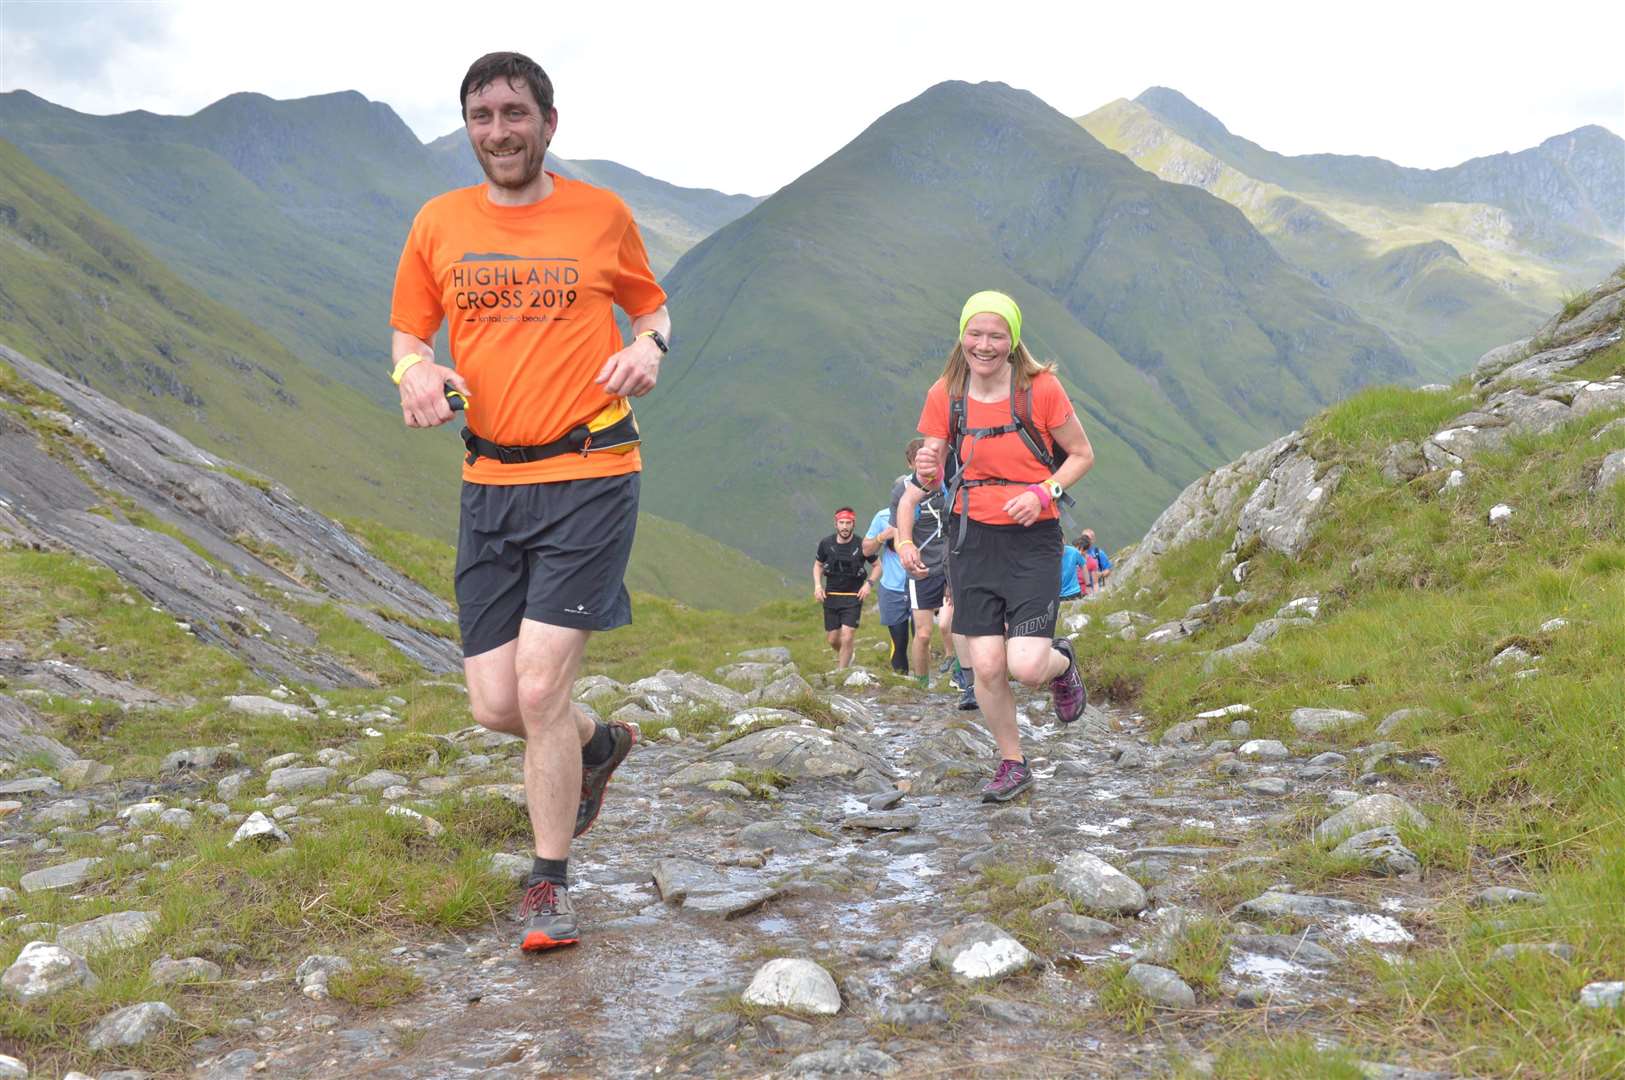 John and Meg Davidson approach the top of the climb above the waterfall in the 2019 Highland Cross. Picture: Robin McConnell